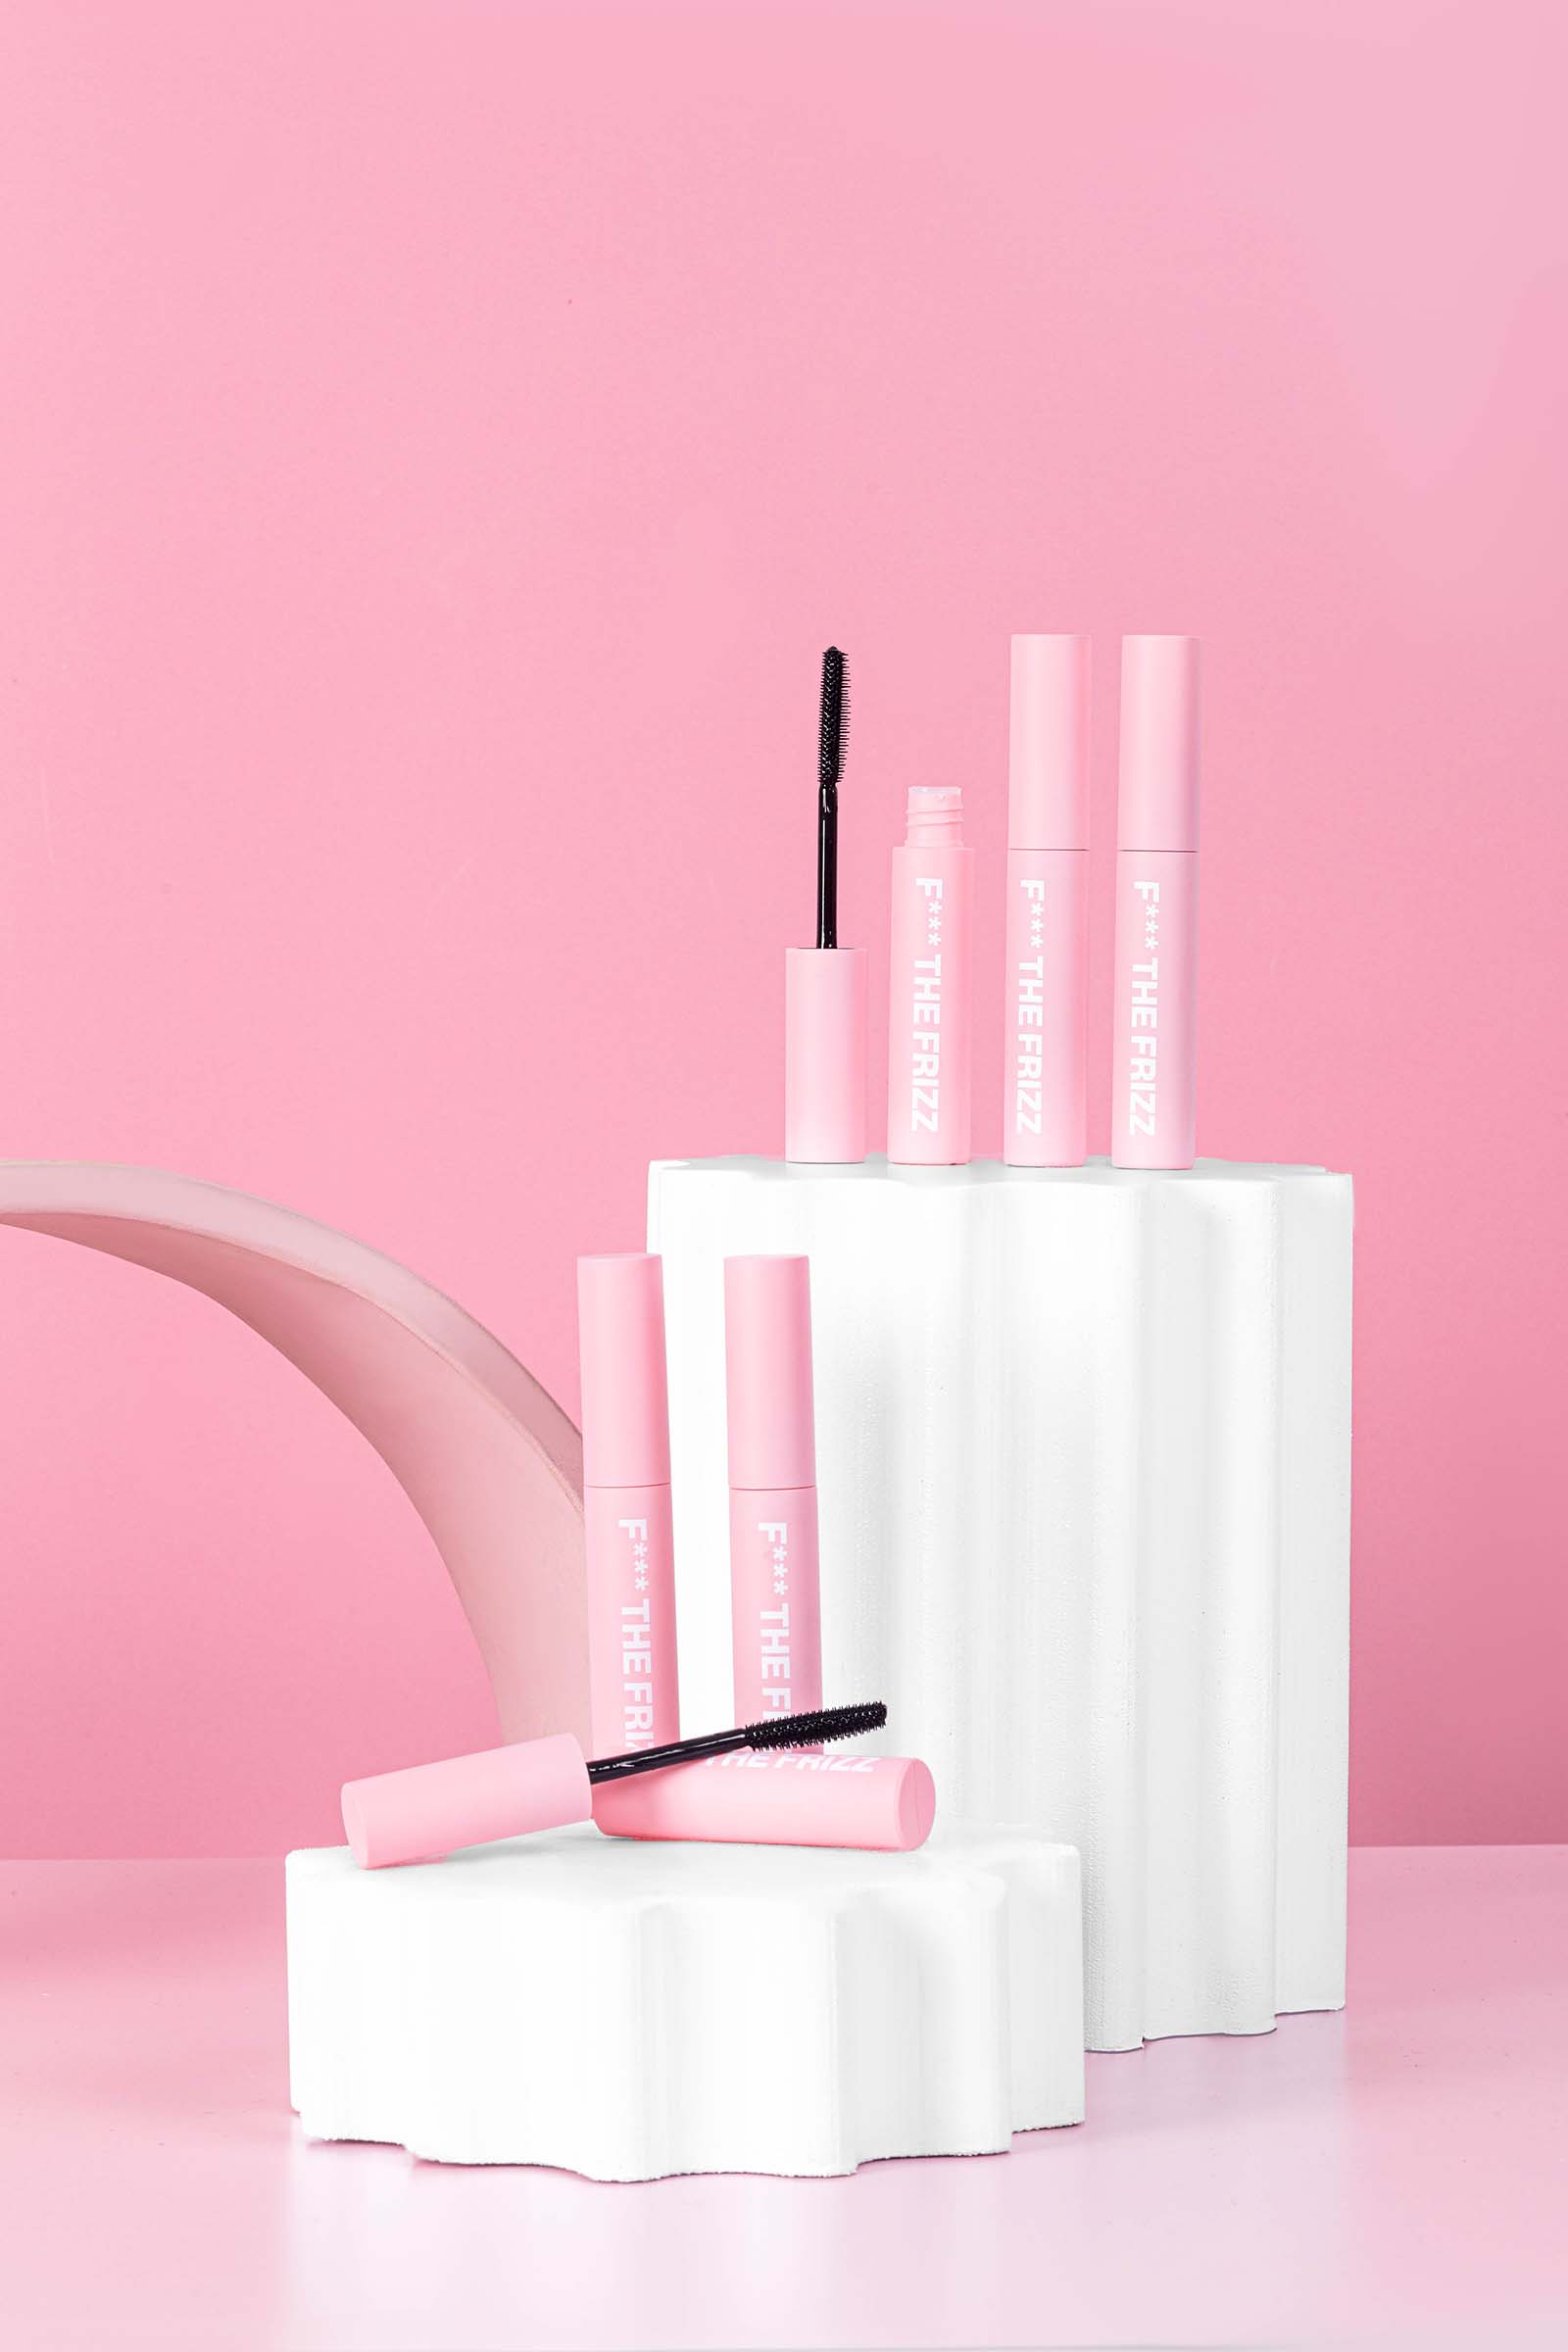 Creative and Fun Pink Product Photos for Anit Frizz Hair Wand. Styled content creation by Megzie Makes